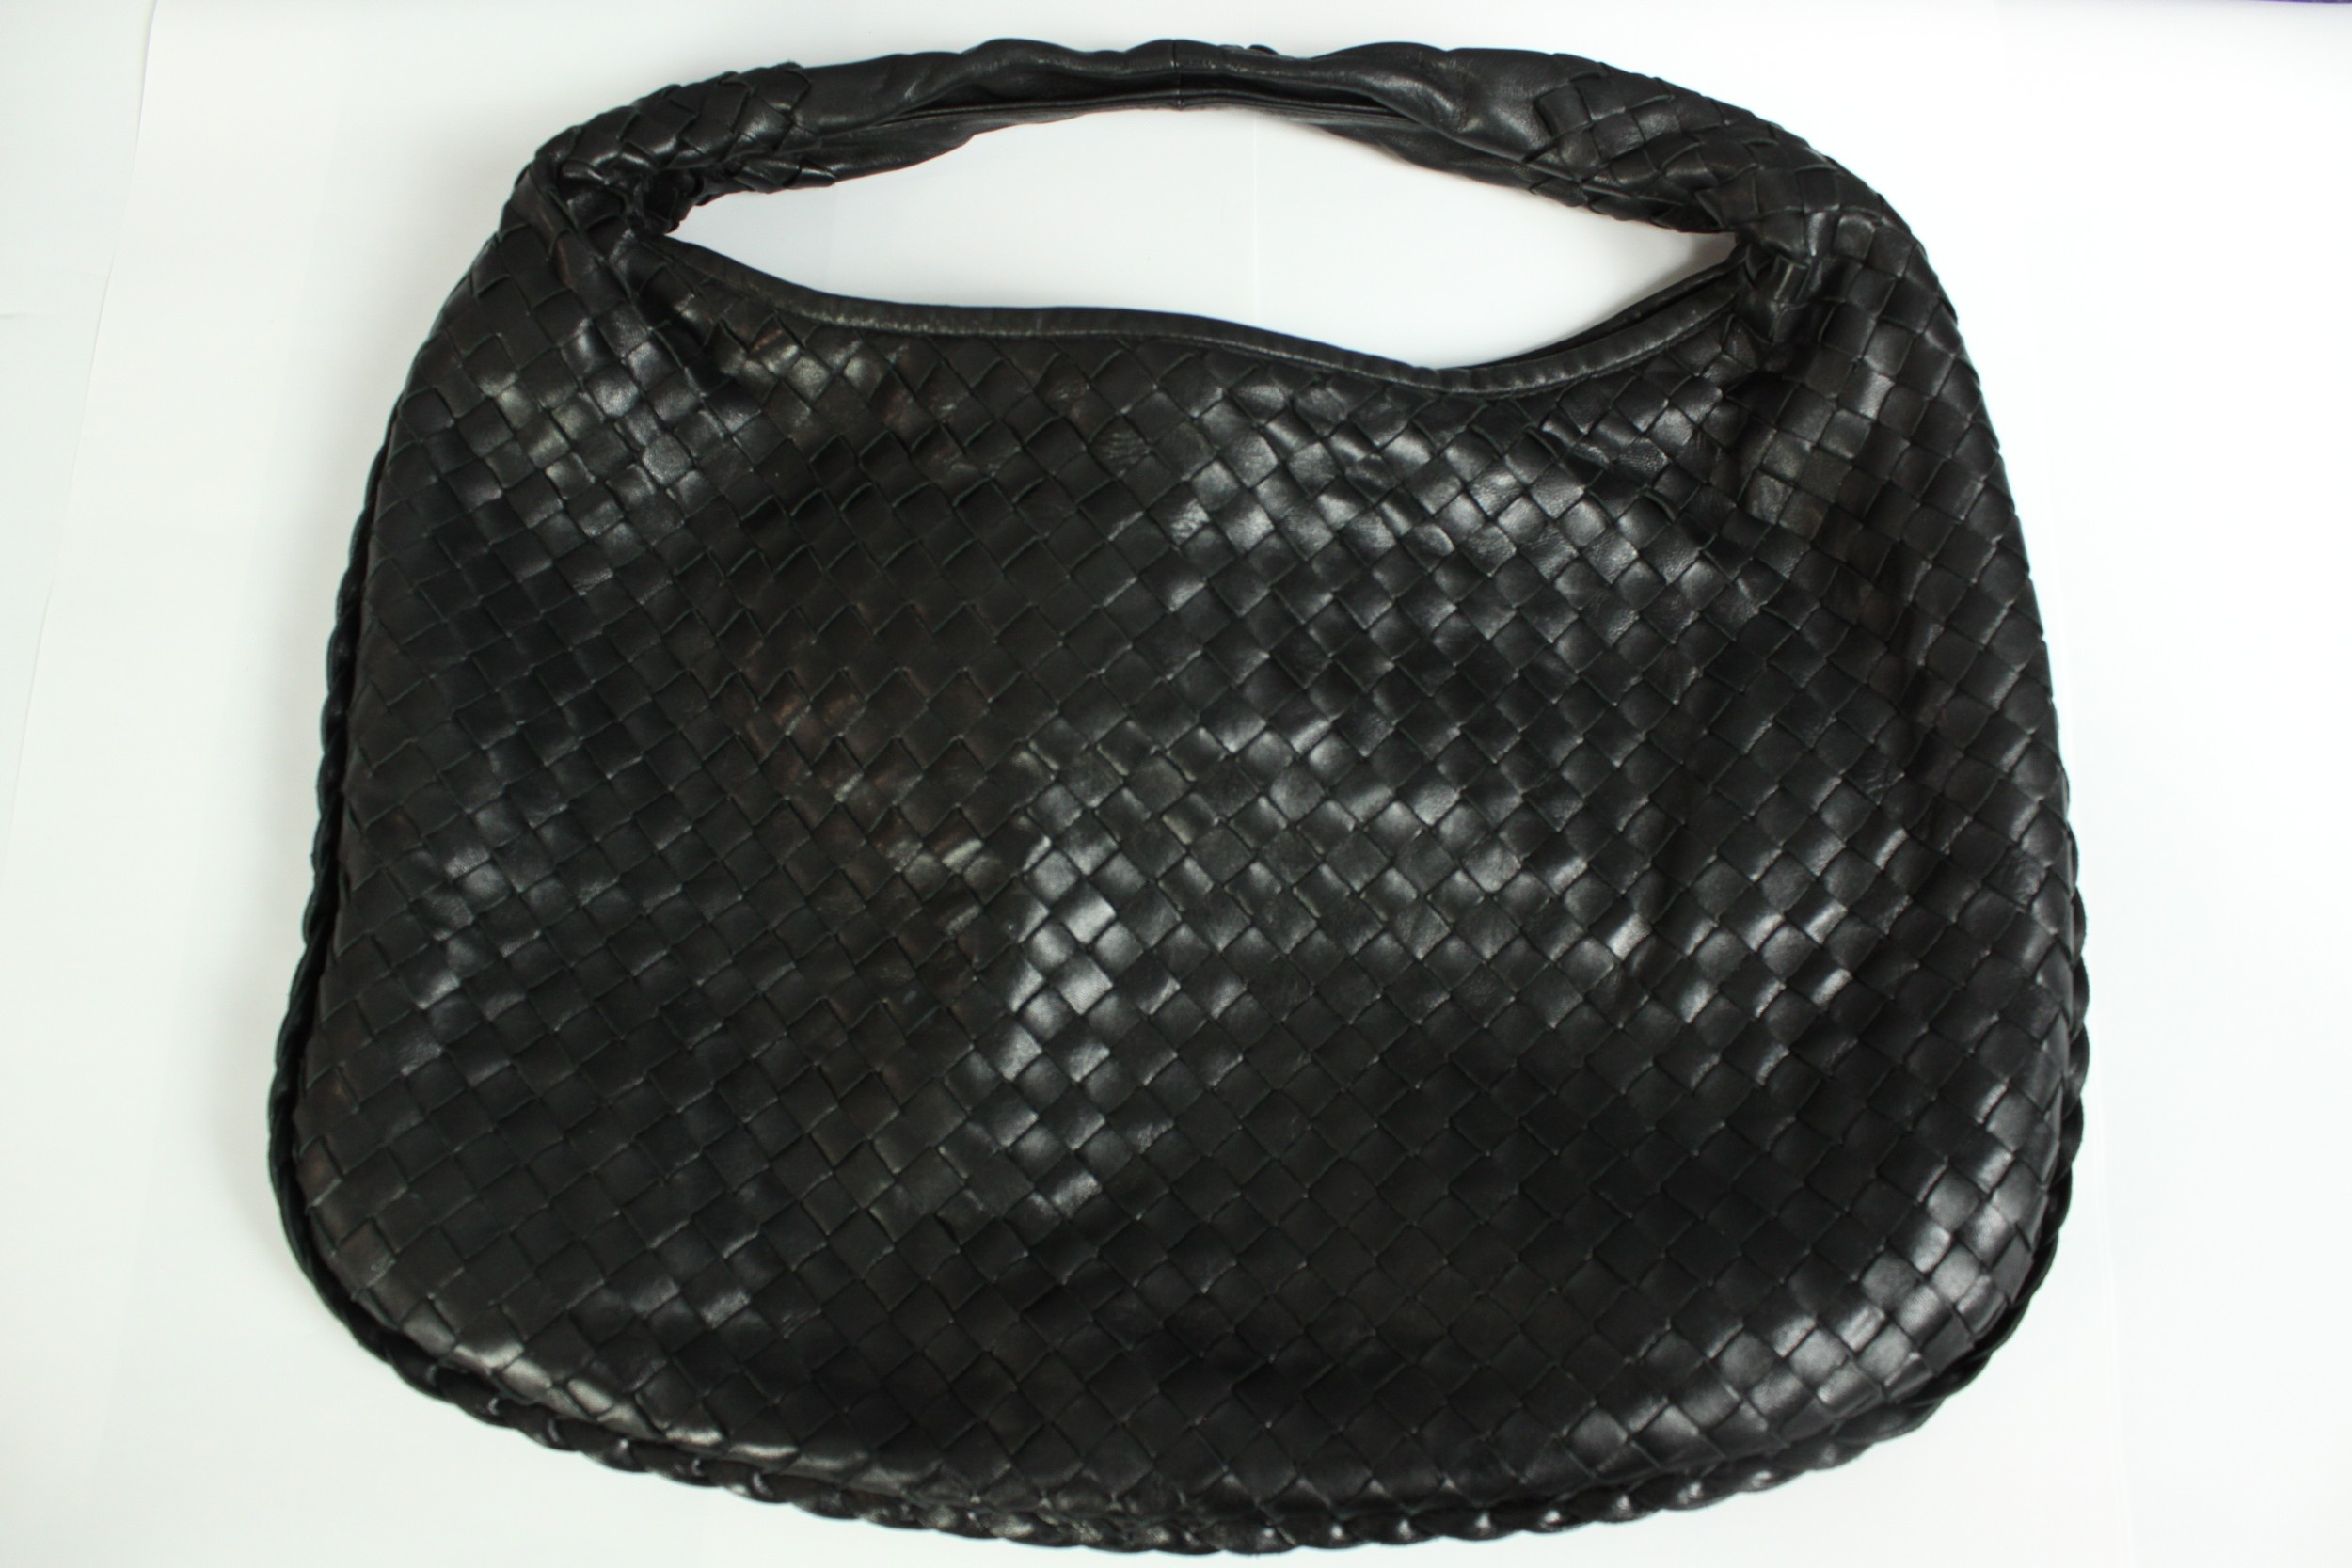 A Bottega Veneta shoulder bag. Intrecciato black leather. With a suede inlay and calf leather shell.